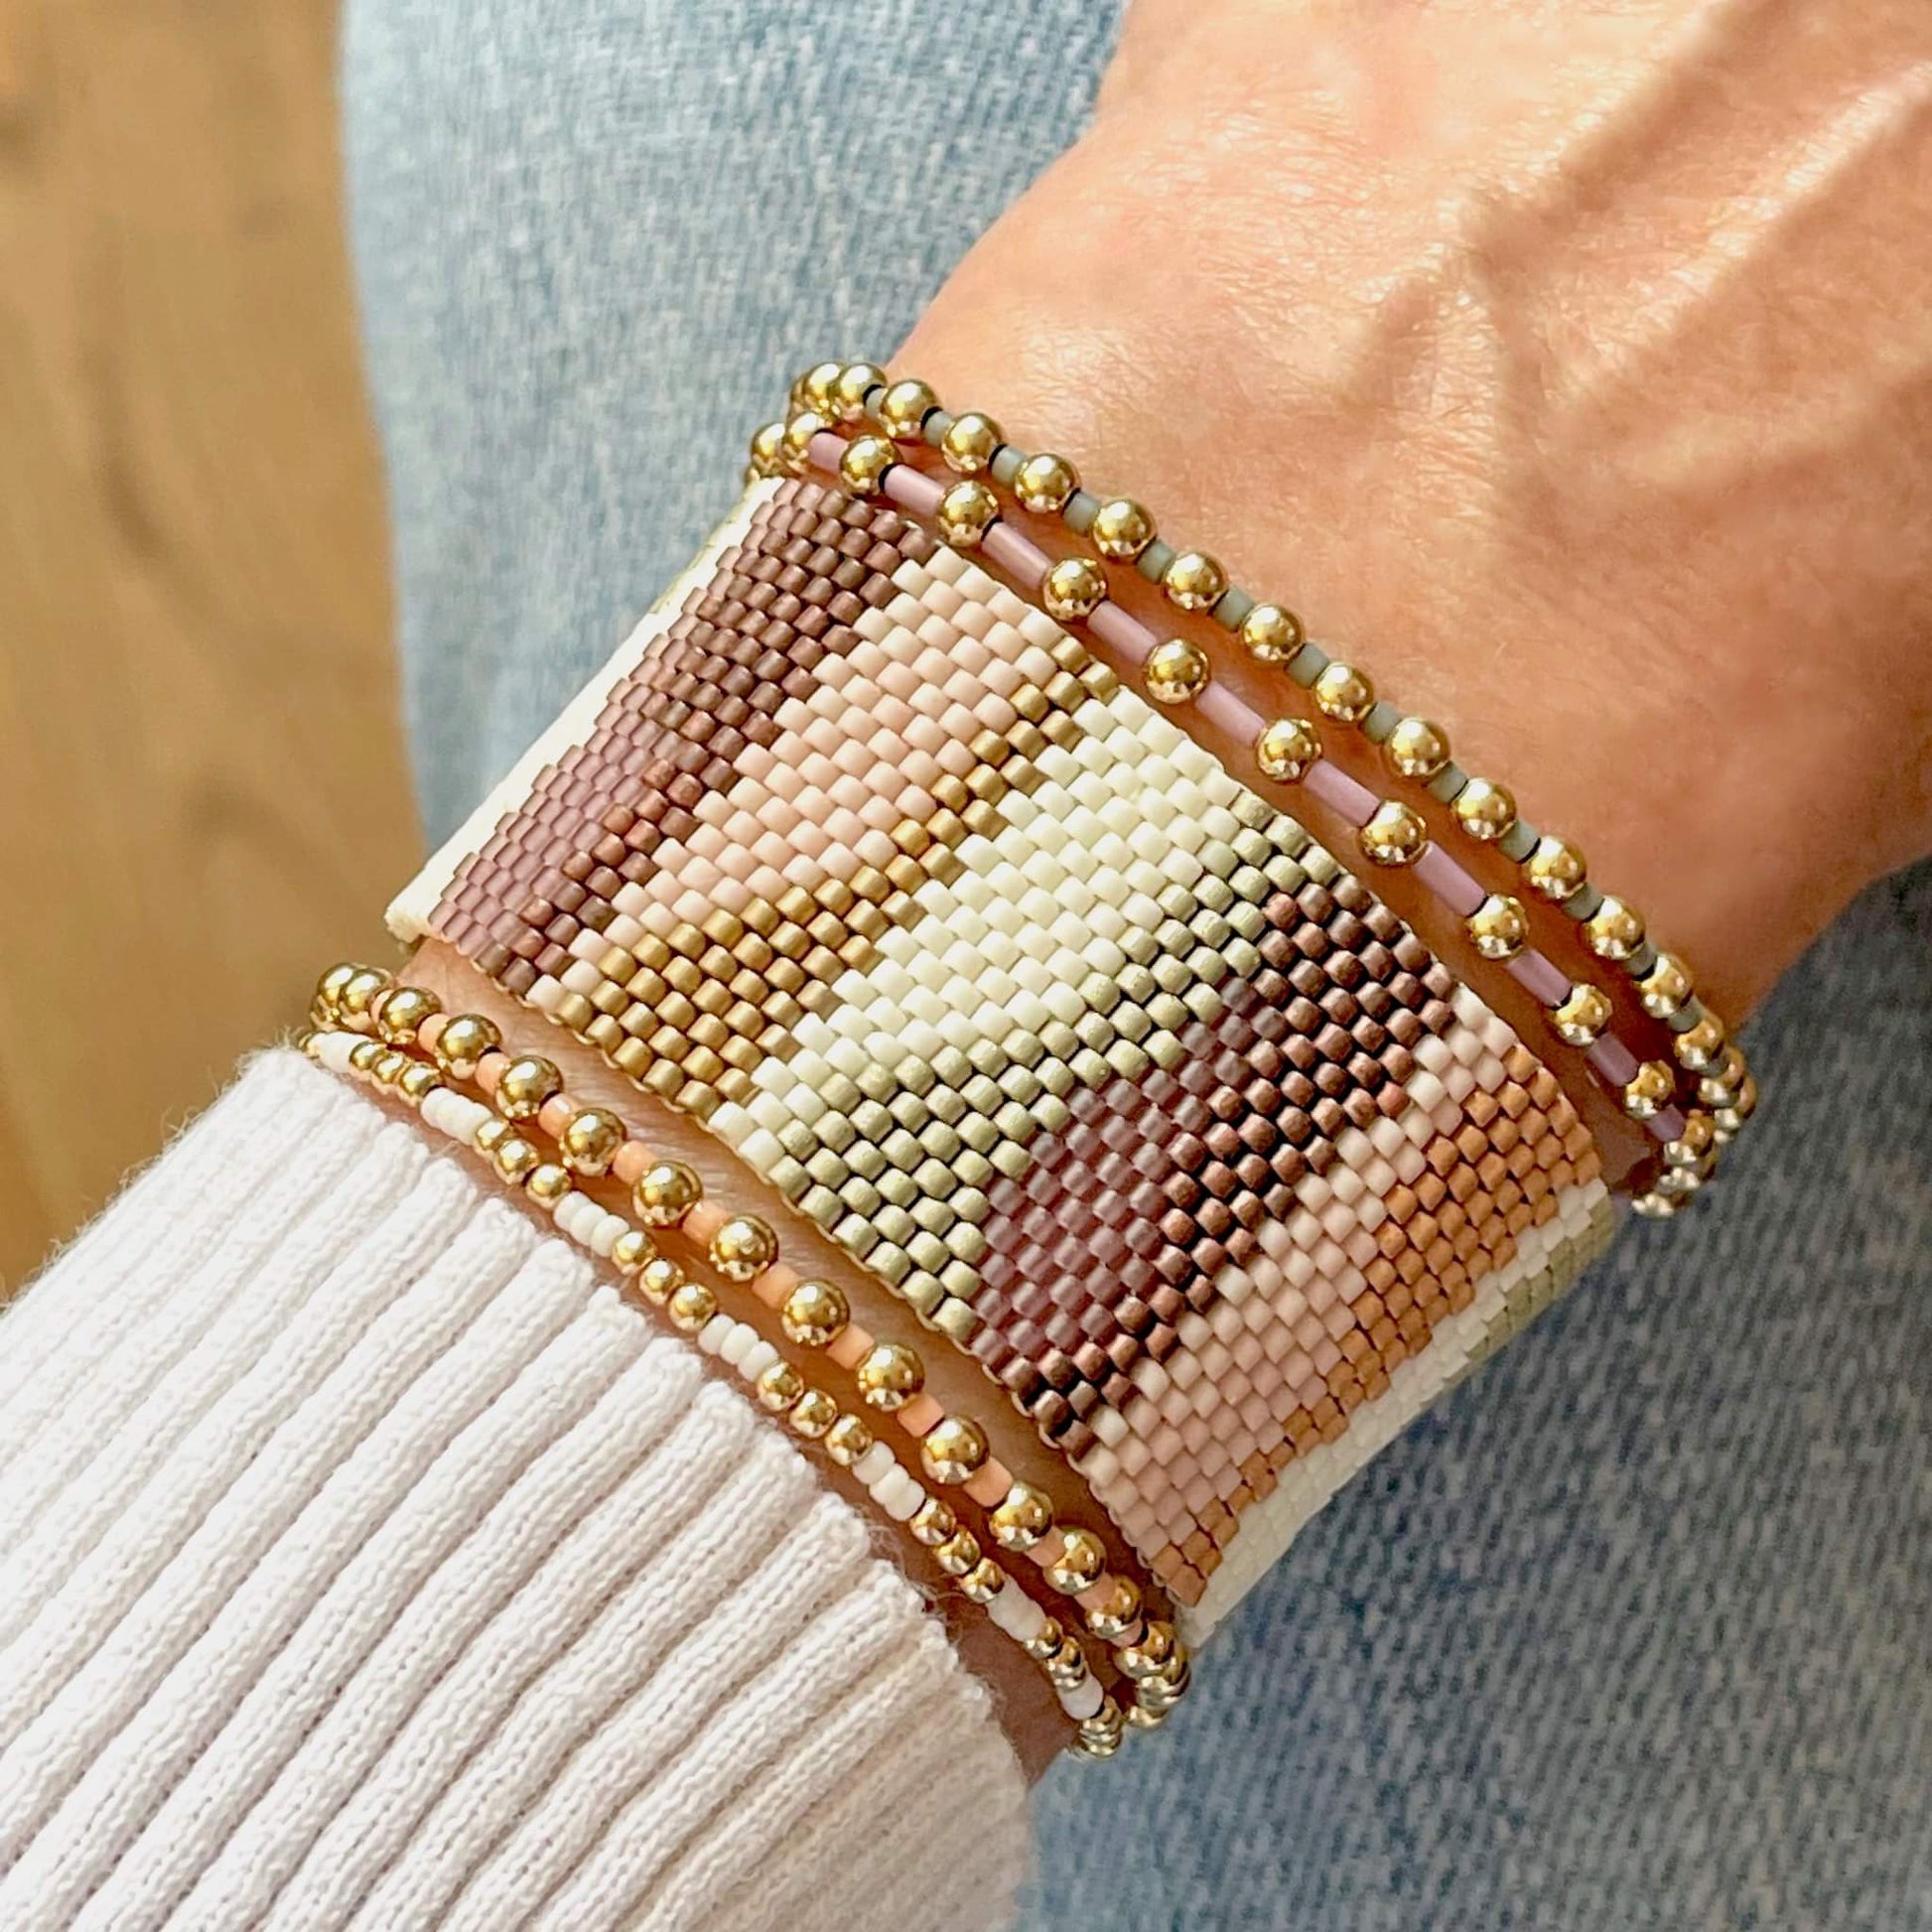 The Camouflage Pink and Plum beaded bracelet set with woven band and 14k gold fill colorful seed bead stretch bracelets.